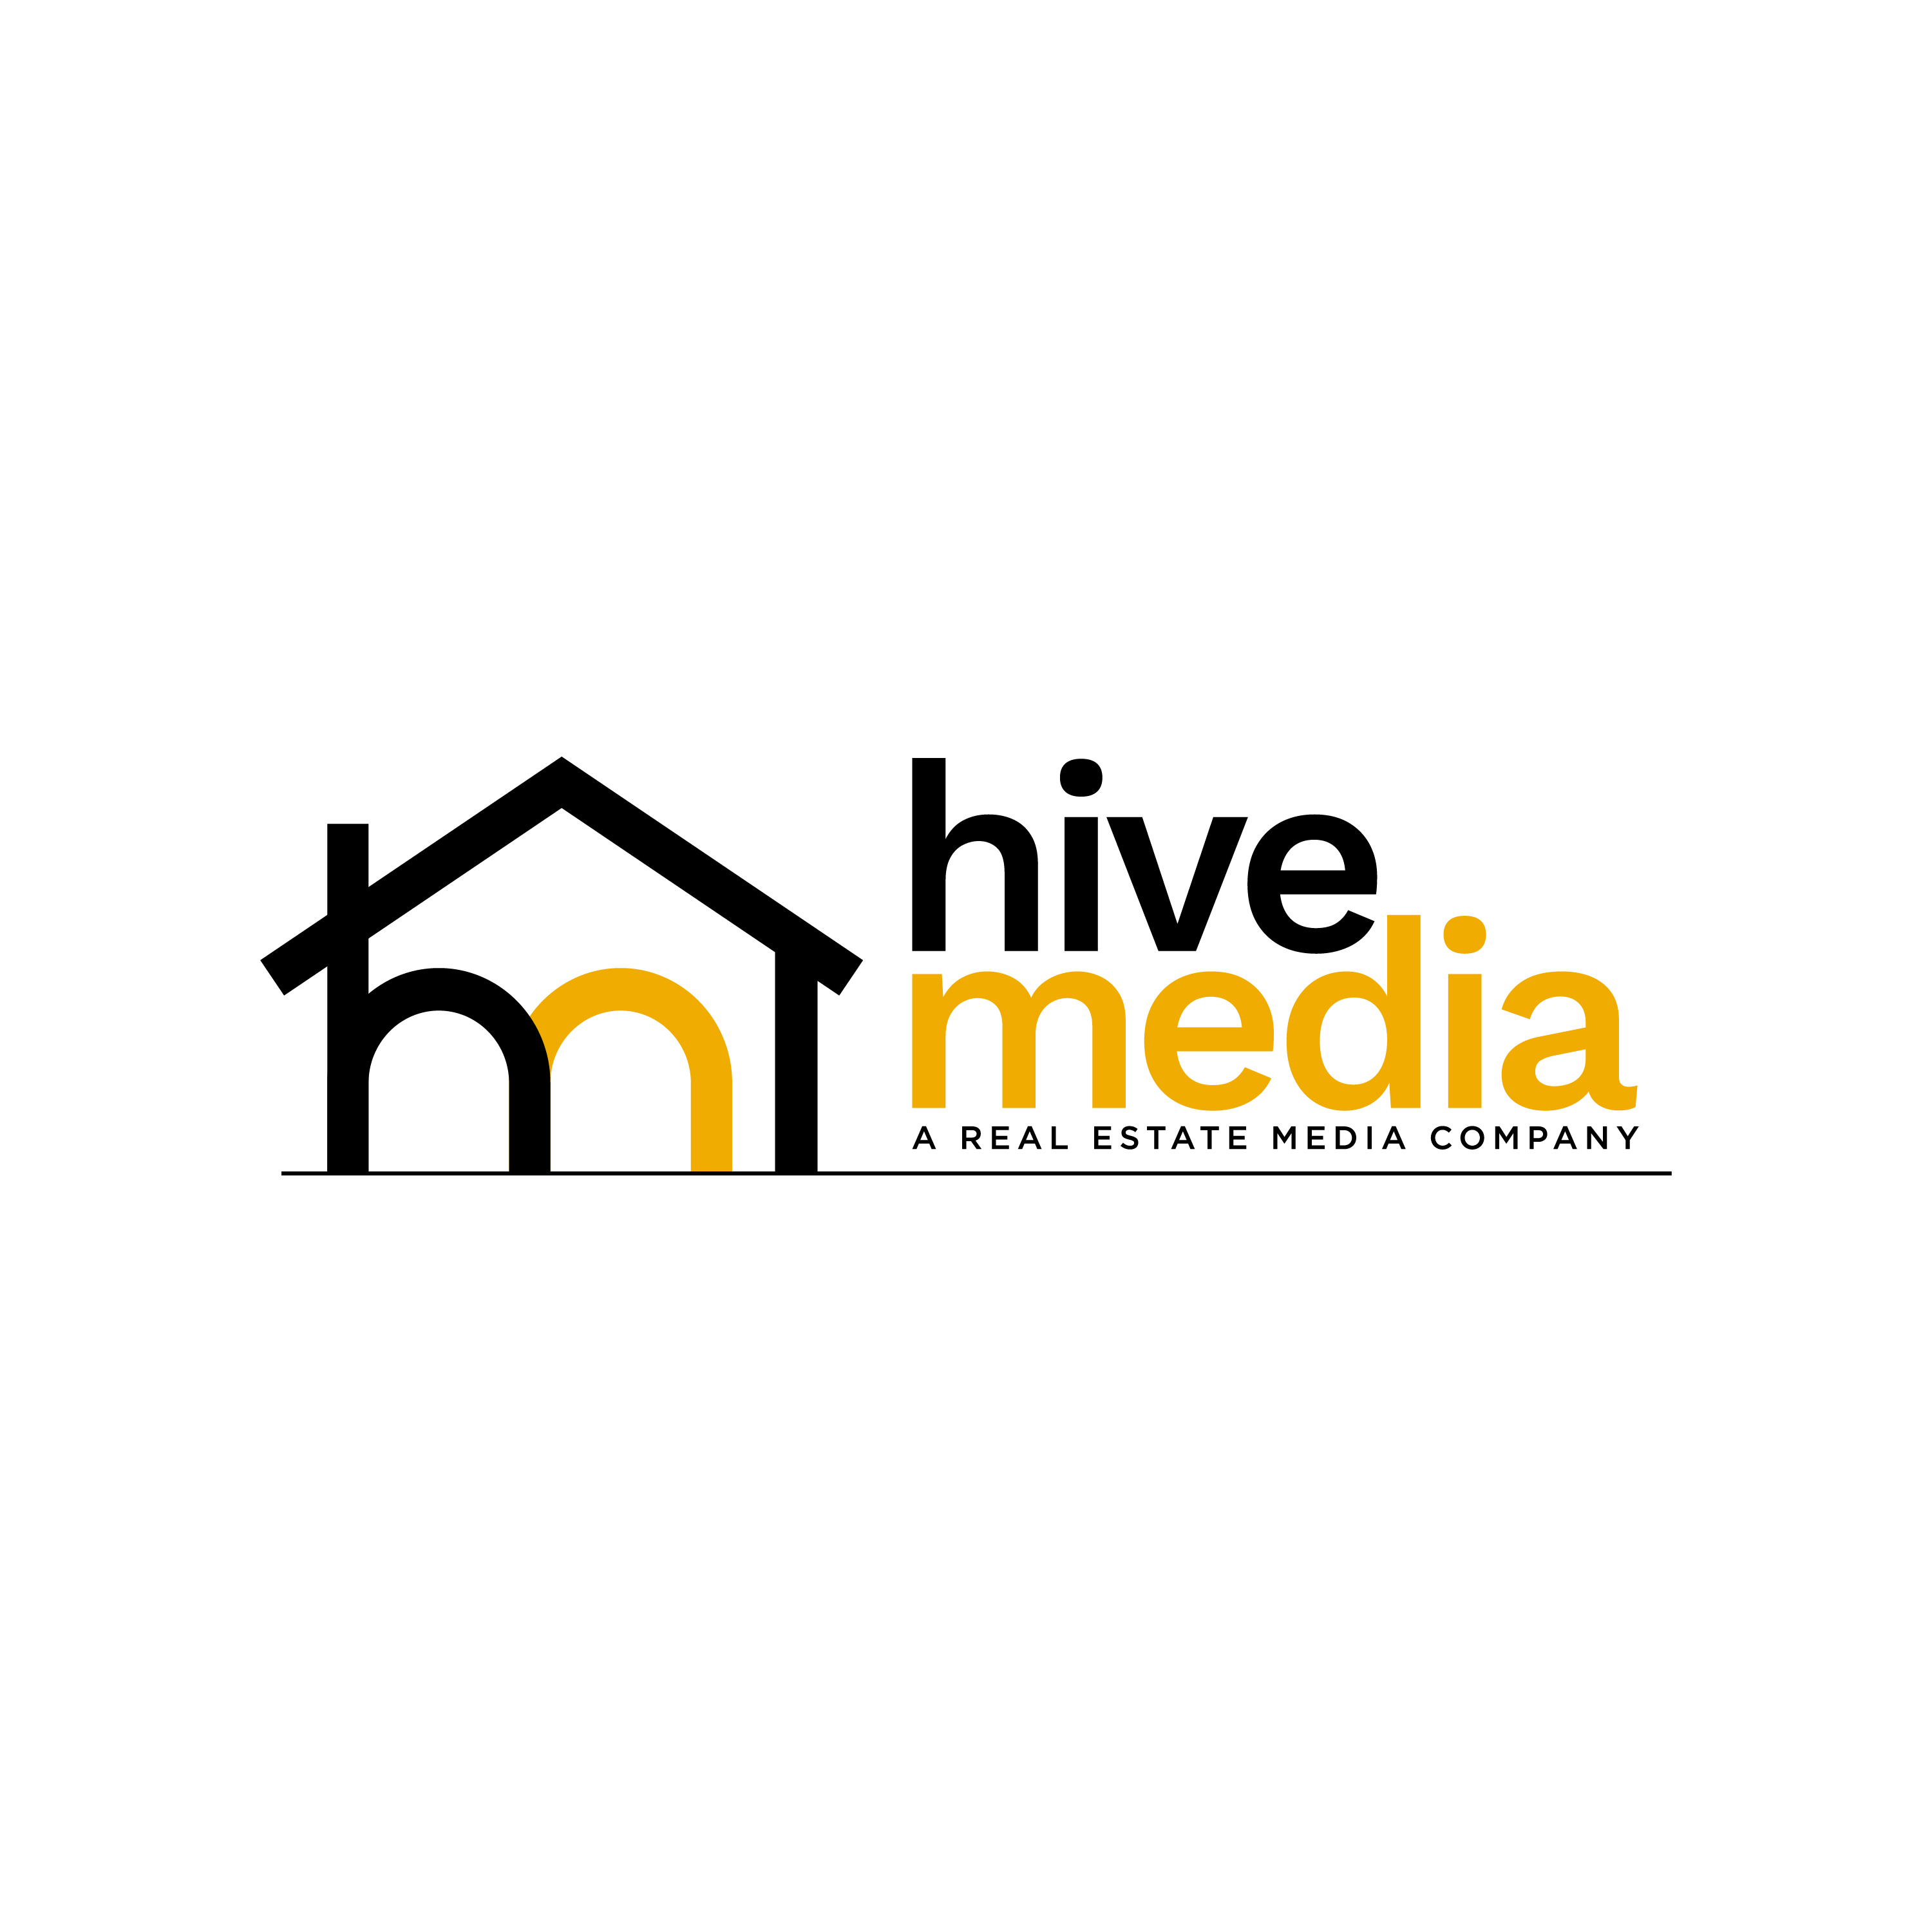 Hive Media Launches Cutting-Edge Website to Enhance Real Estate Media Services